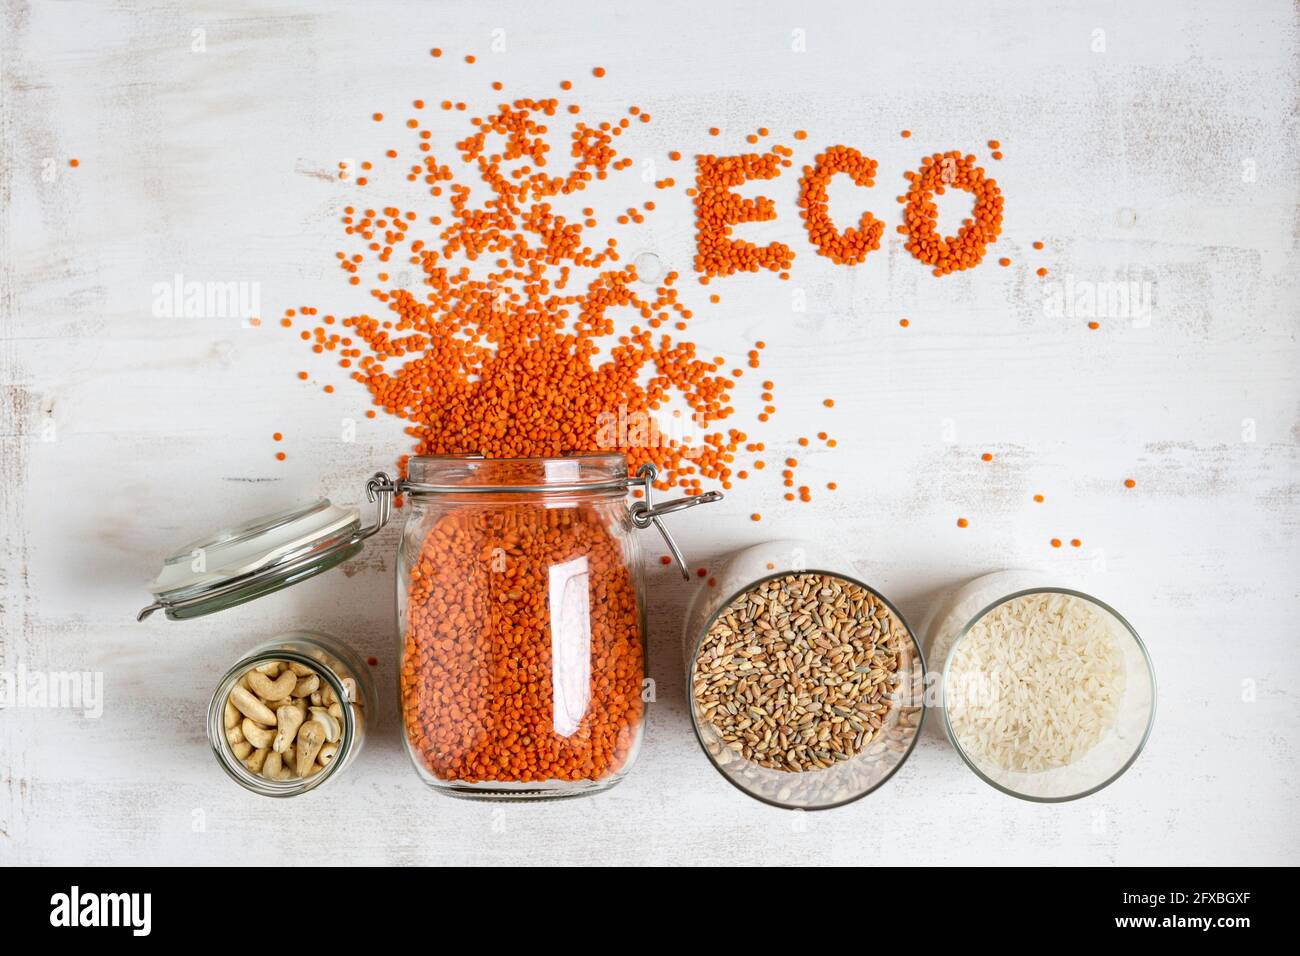 Variation of dried food with Eco text on textured background Stock Photo